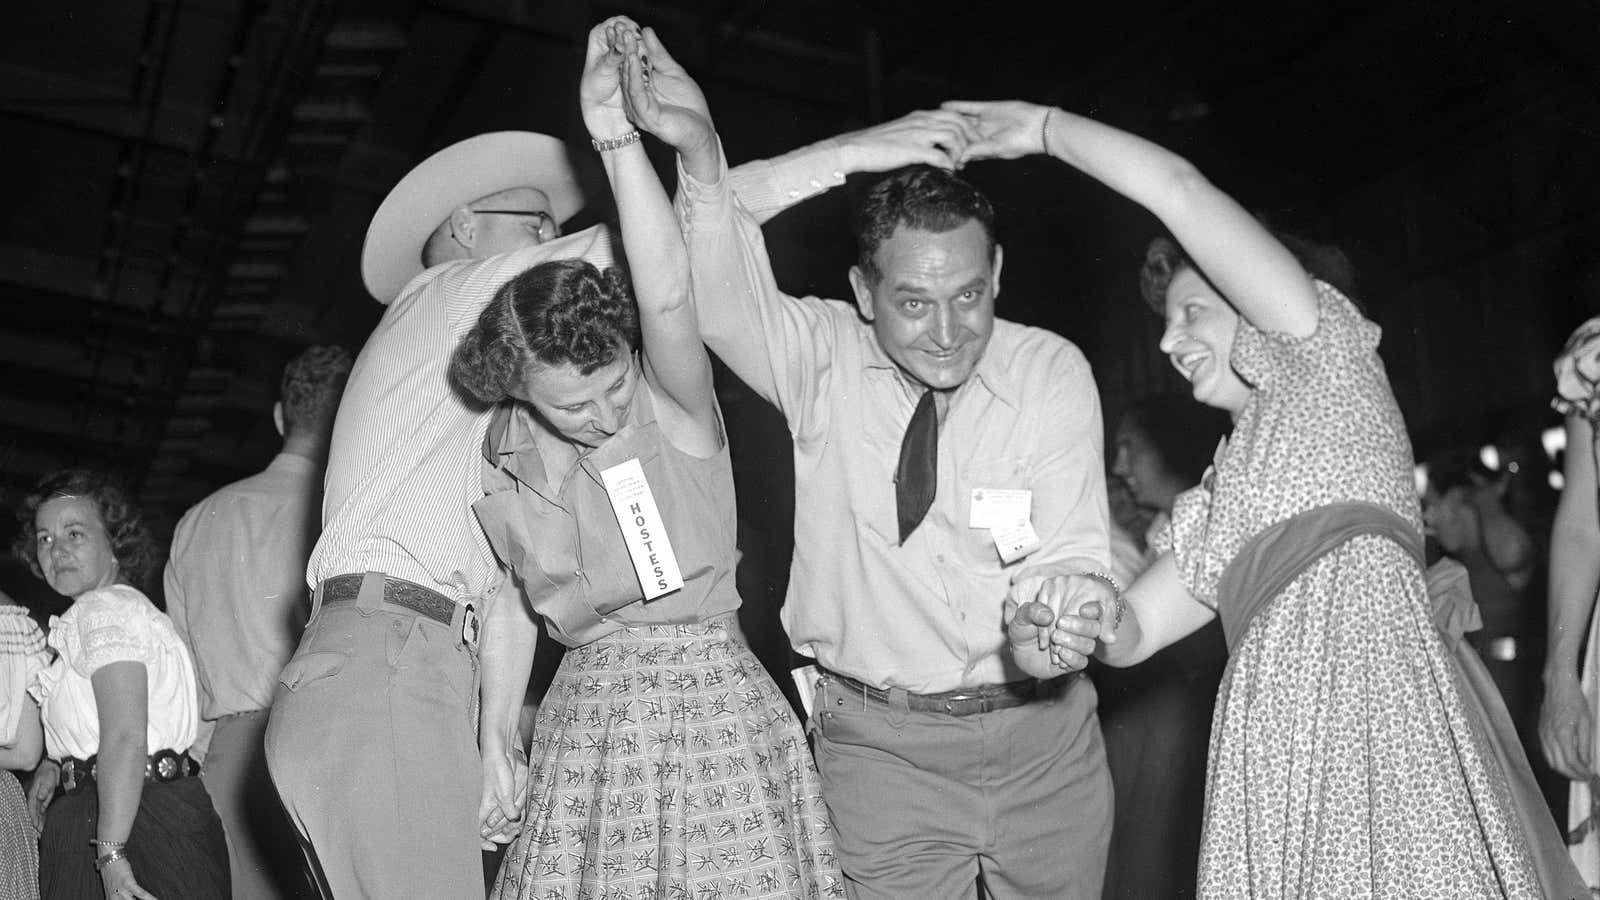 America's wholesome square dancing tradition is a tool of white